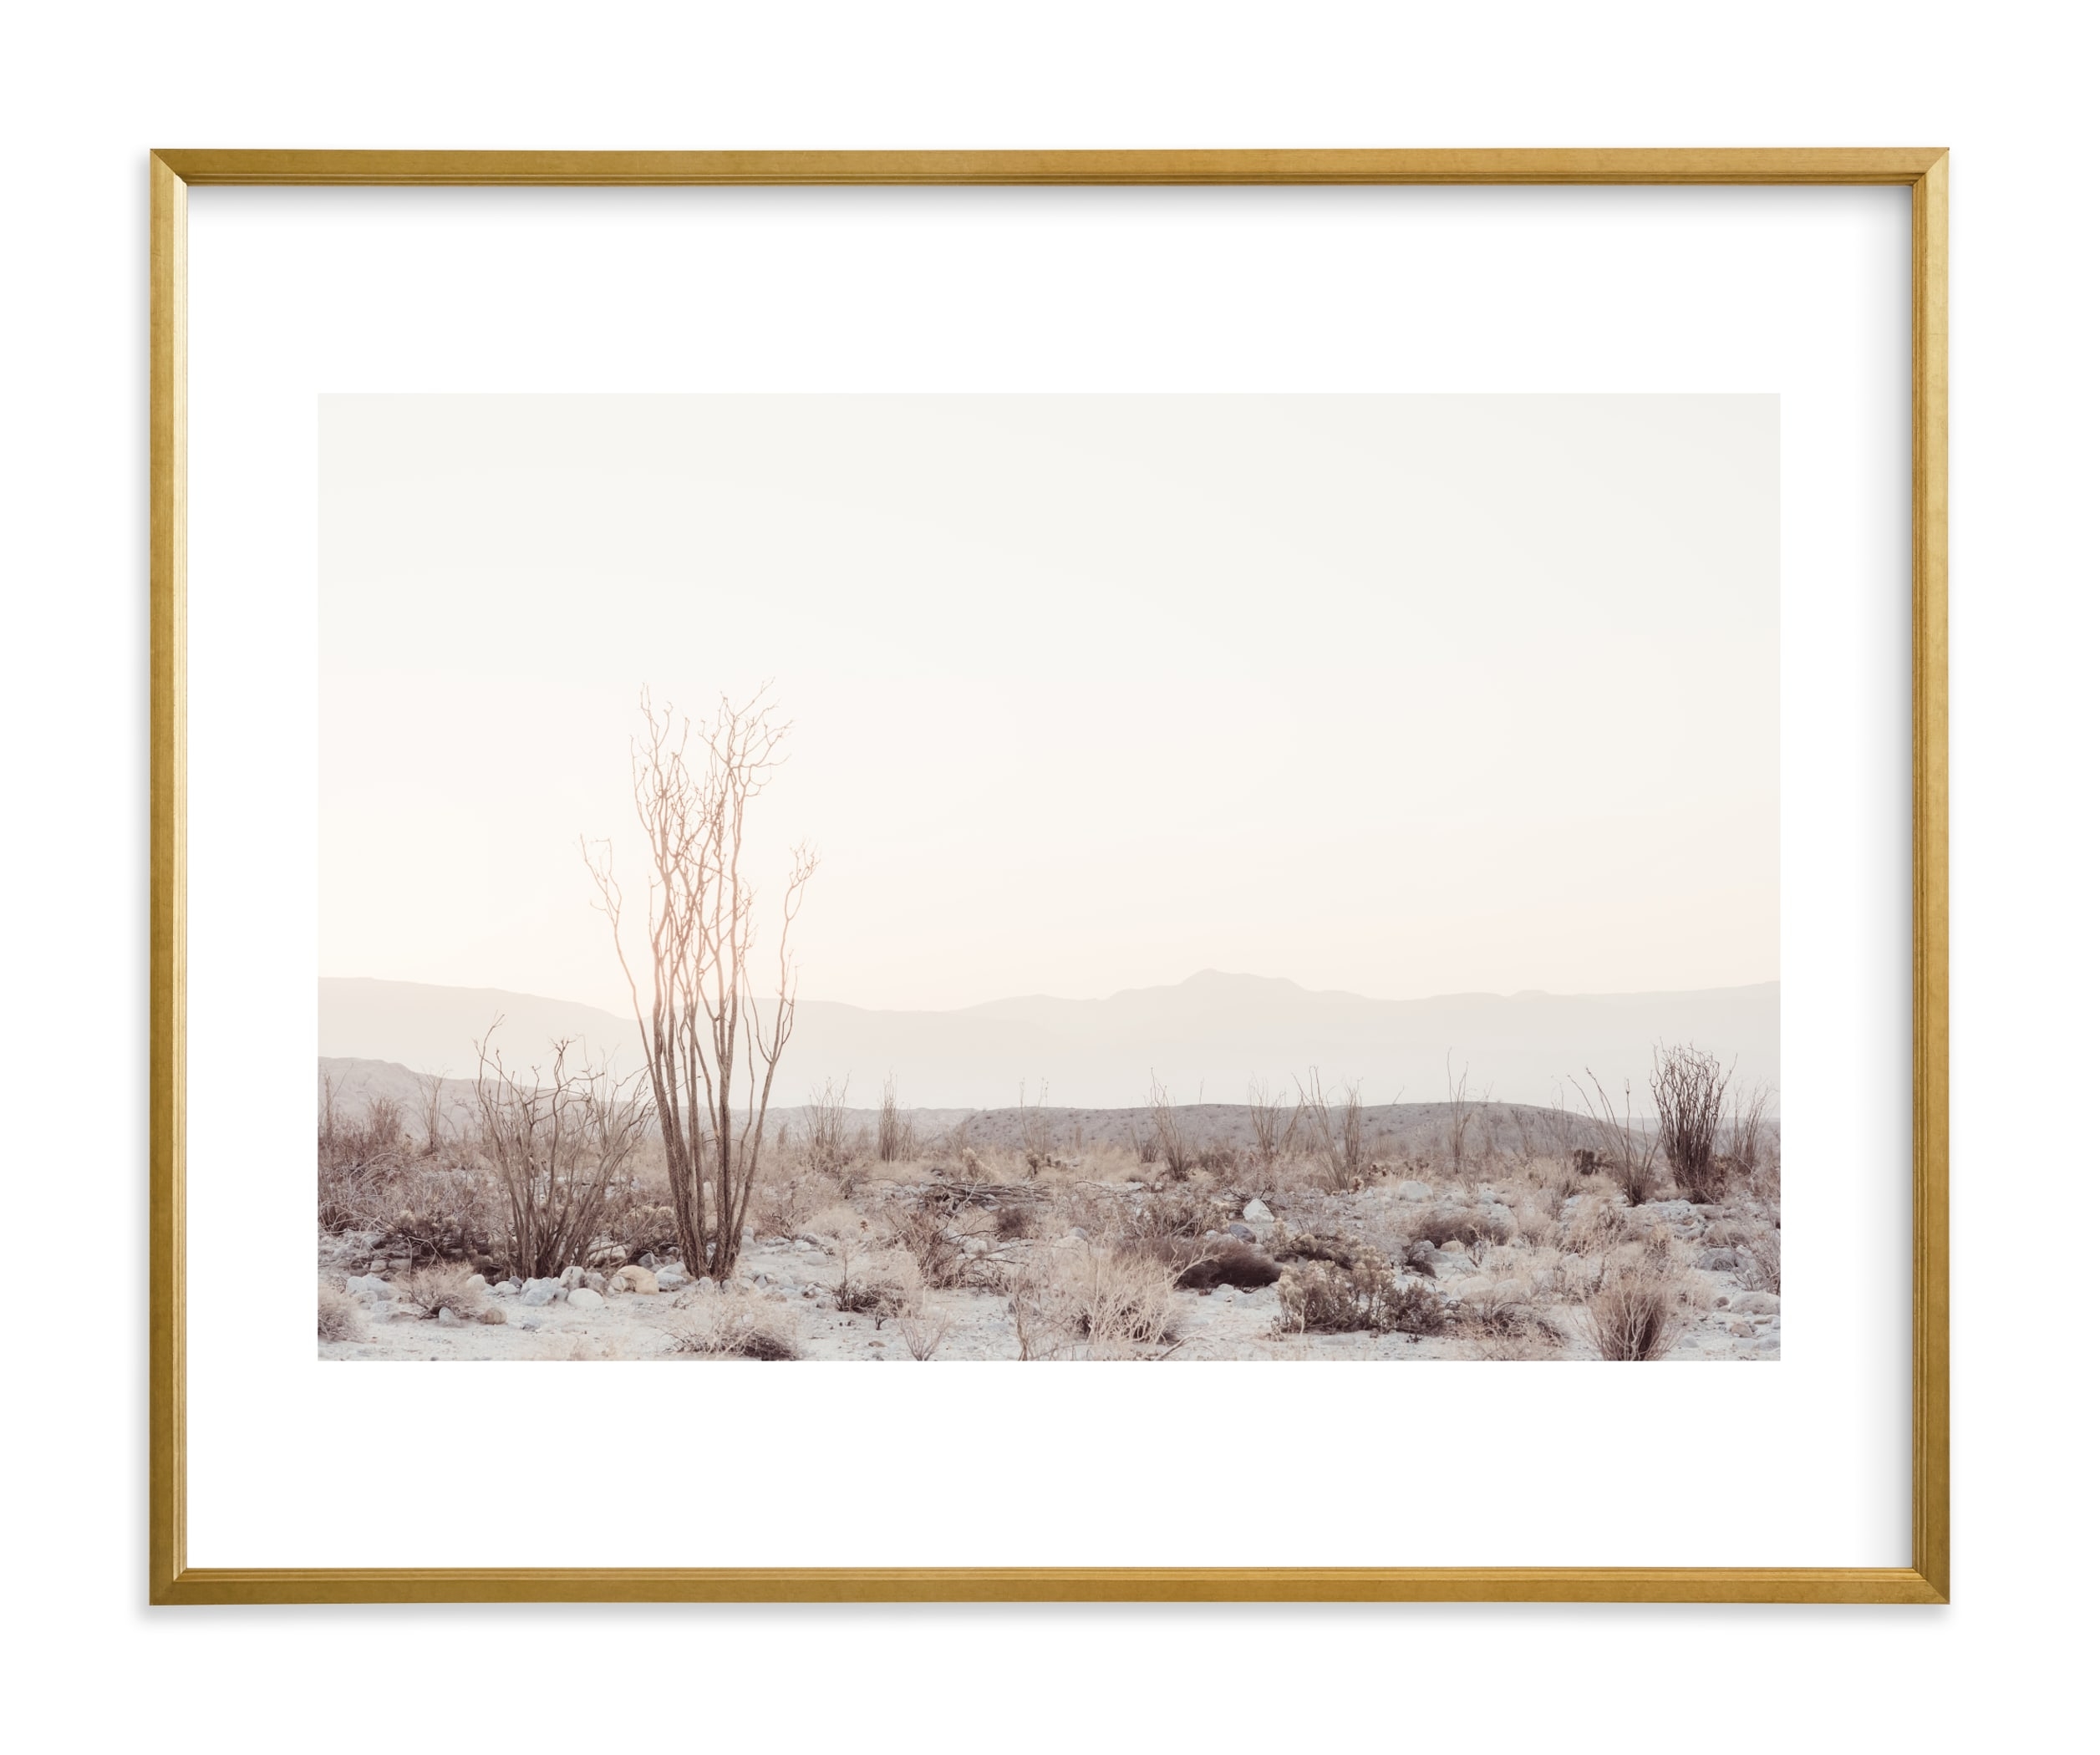 ocotillo ii 40 x 30 matted with Gilded Wood Frame_WHITE BORDER - Image 0